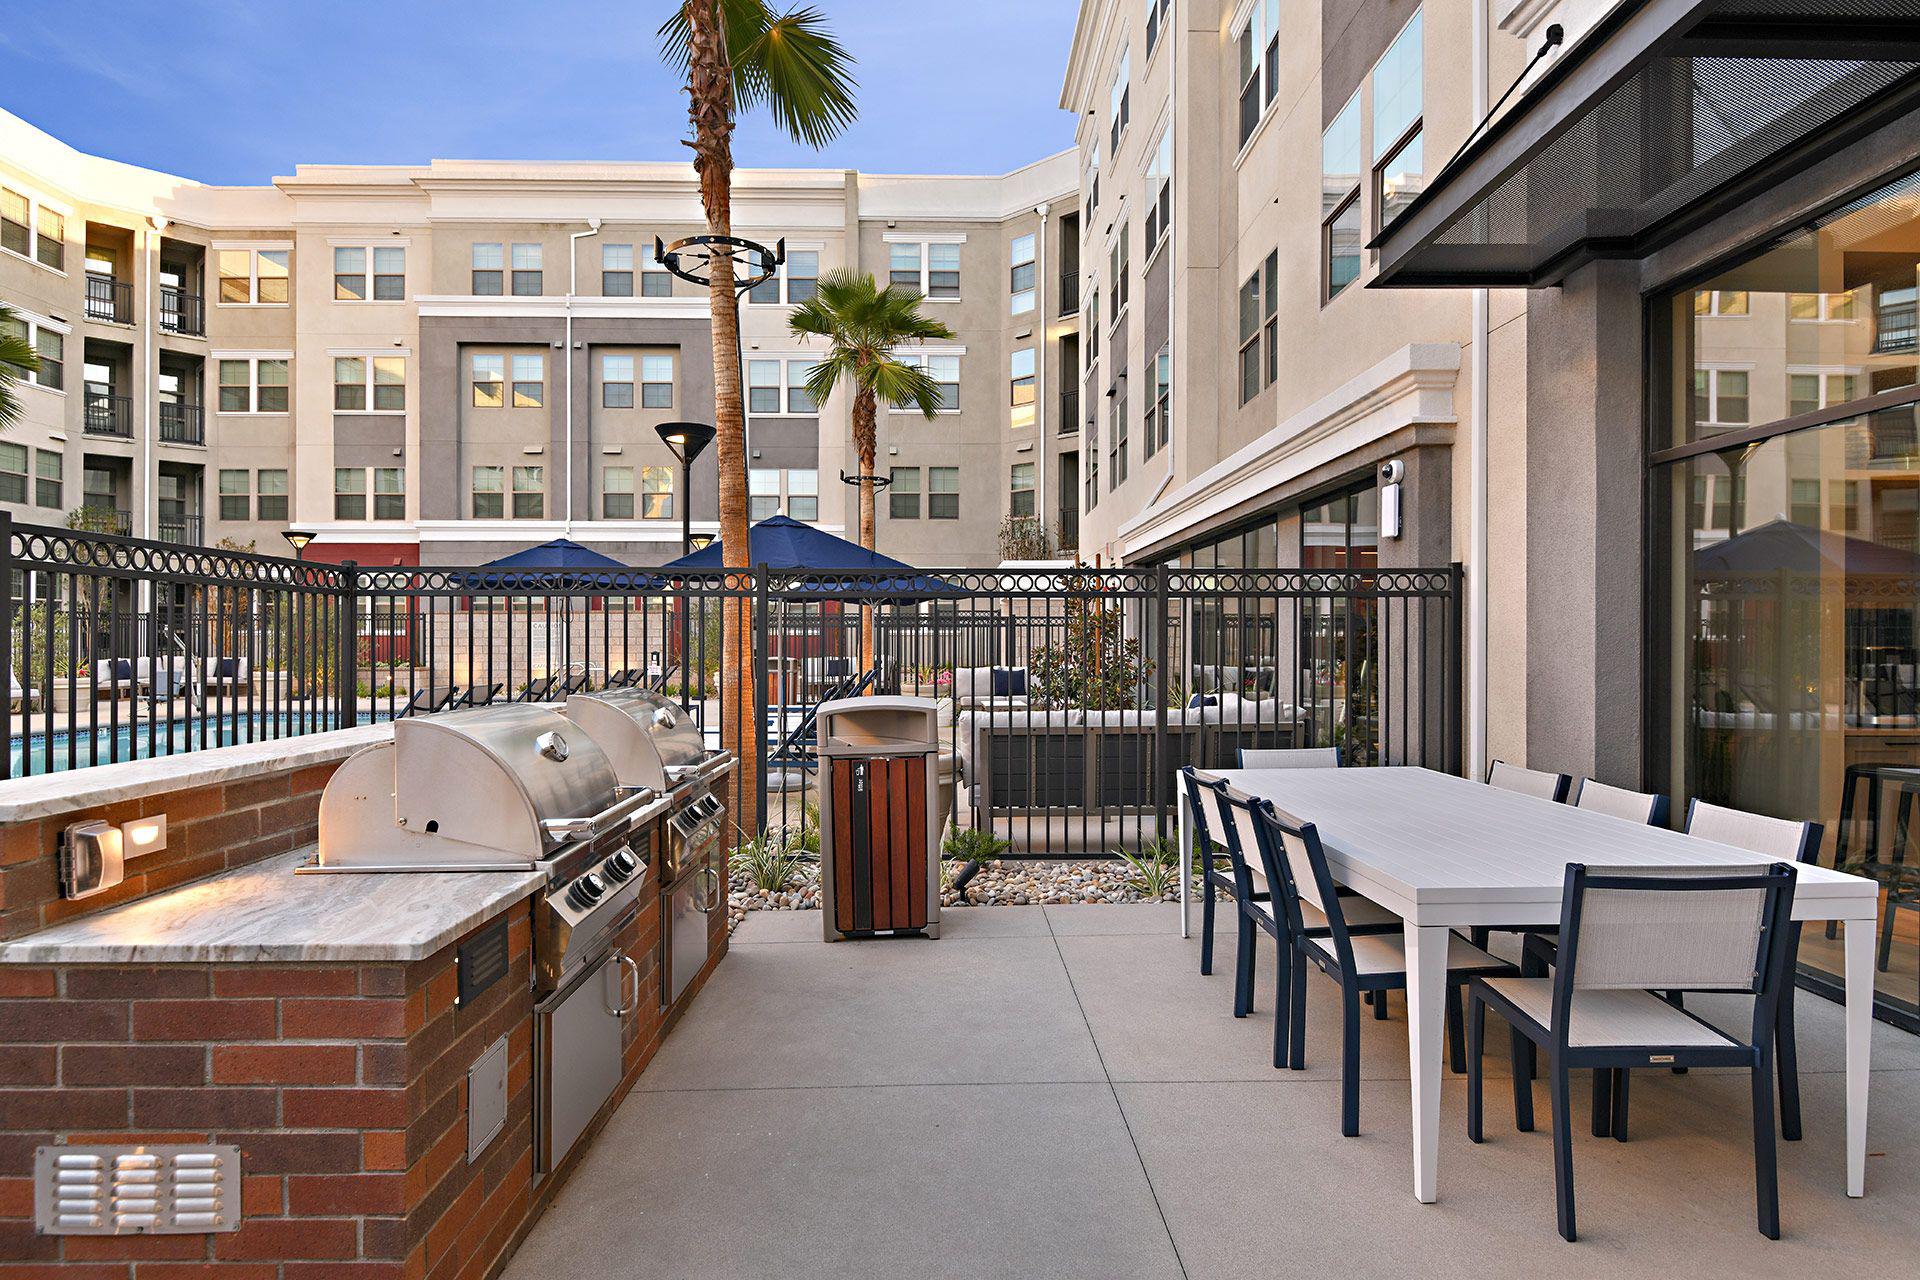 BBQ grilling area at The Huntington luxury apartments in Duarte, CA.